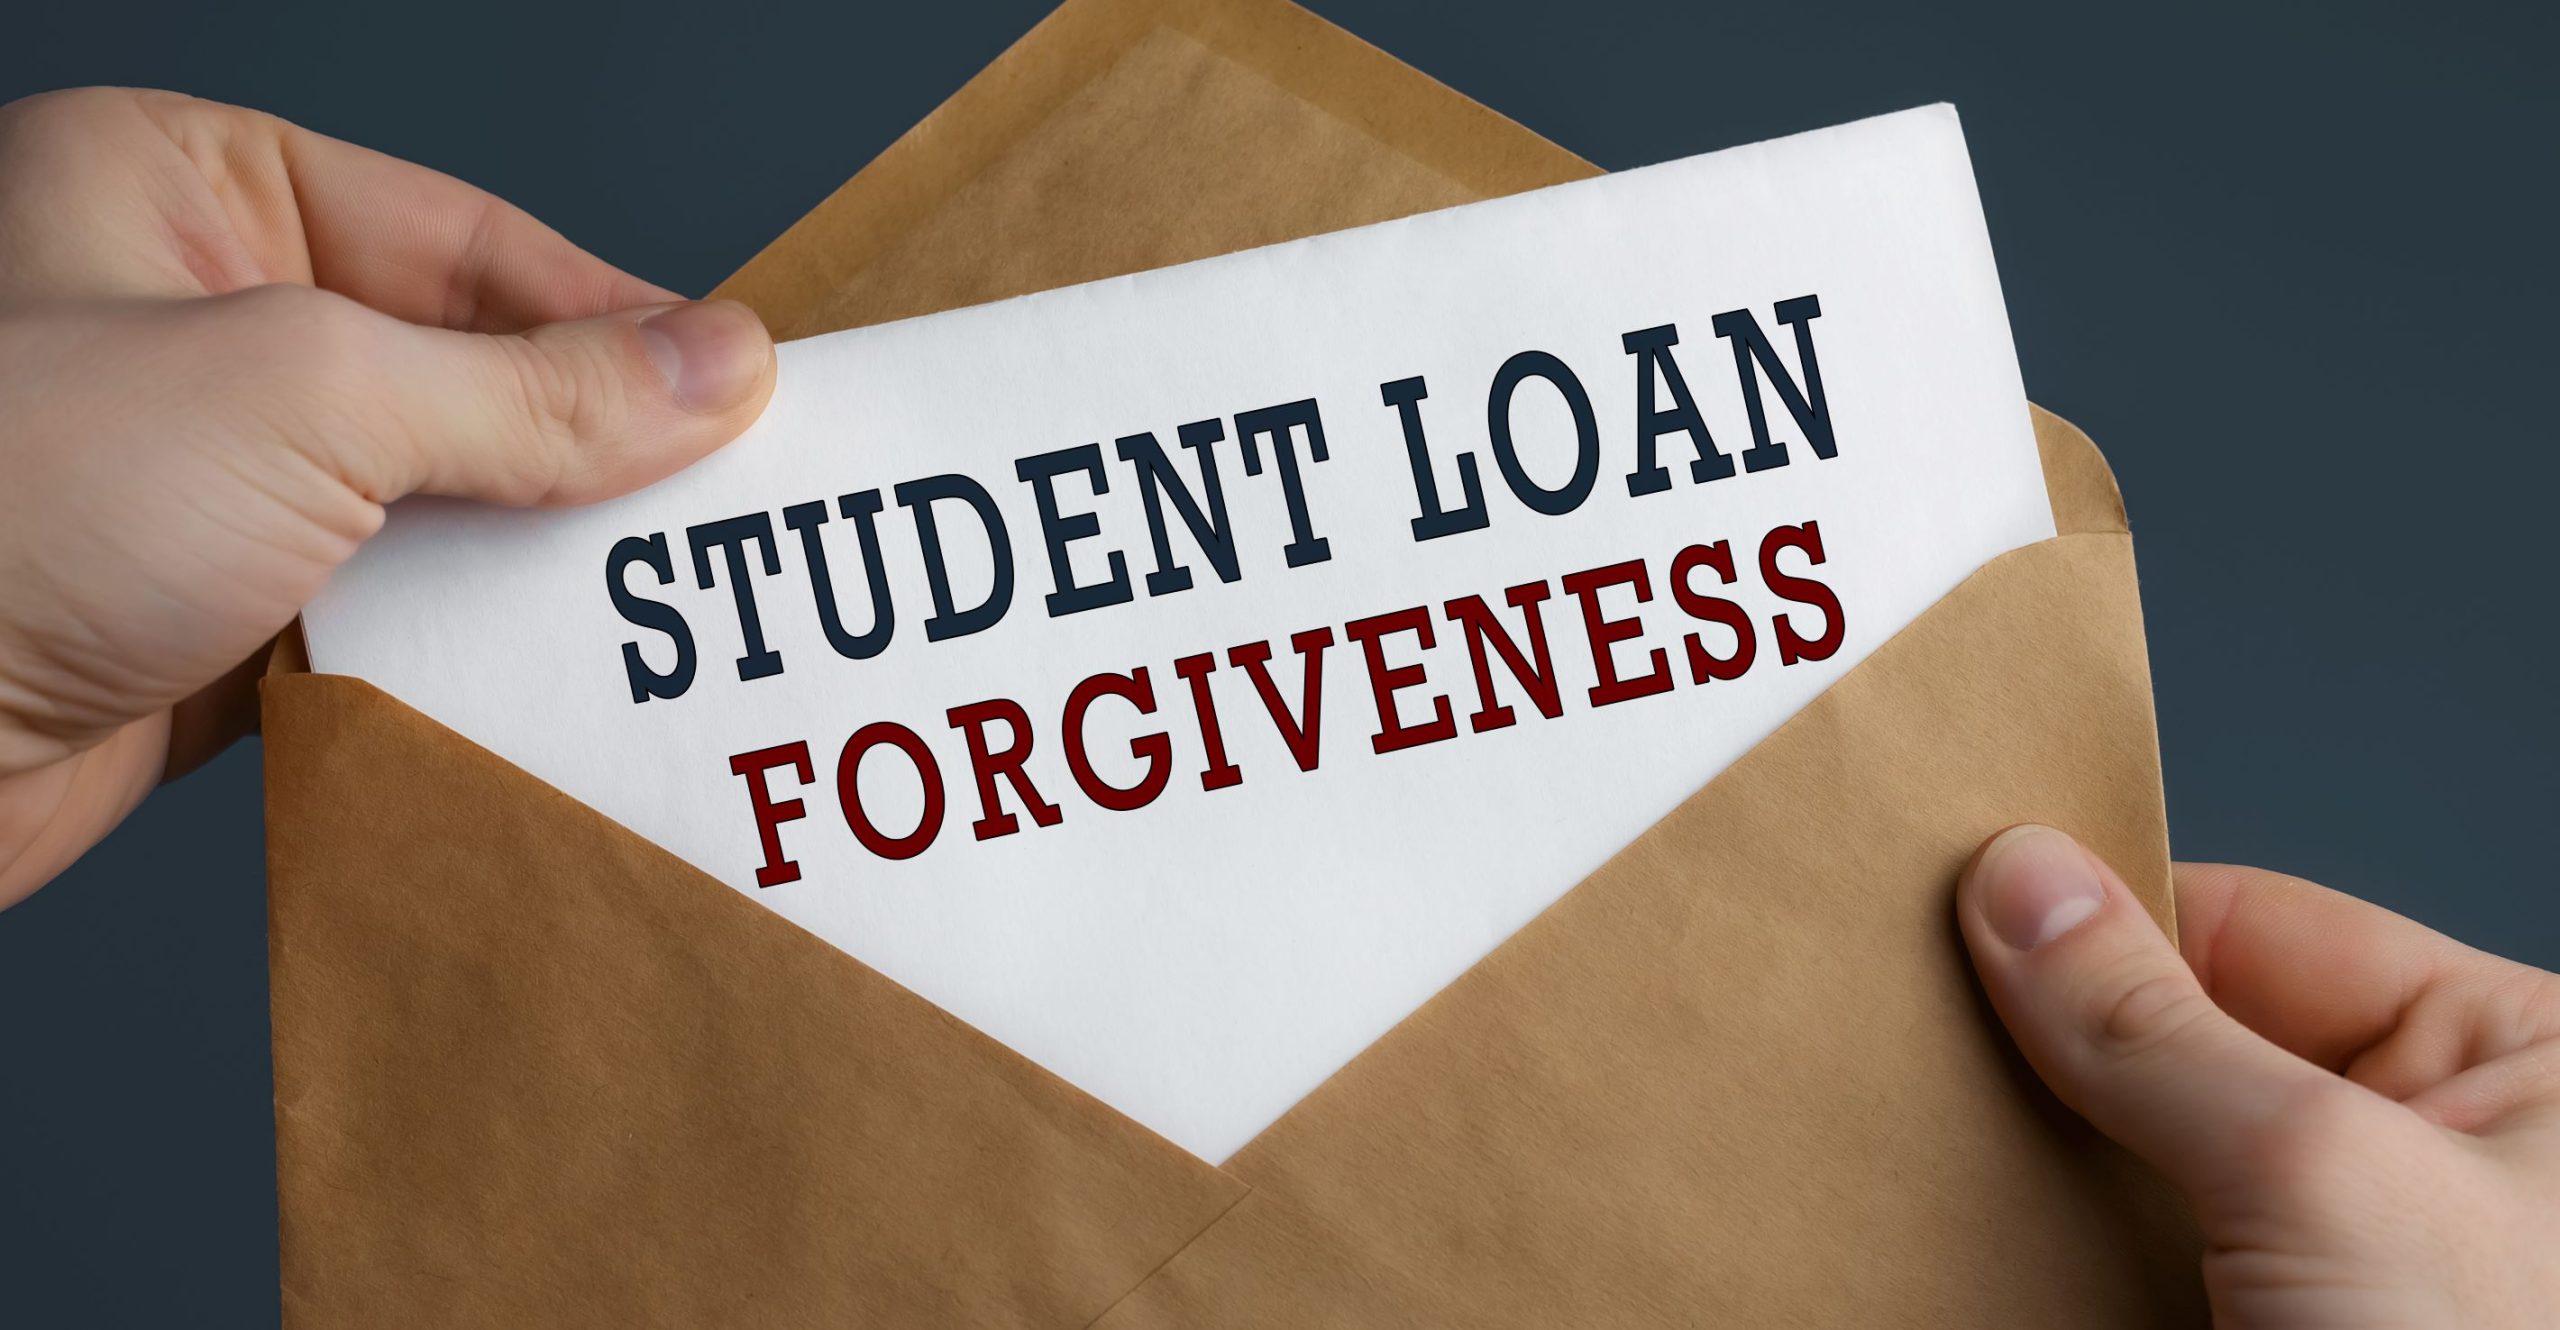 What You Need to Know About Student Loan Forgiveness and Delayed Repayment Schedules